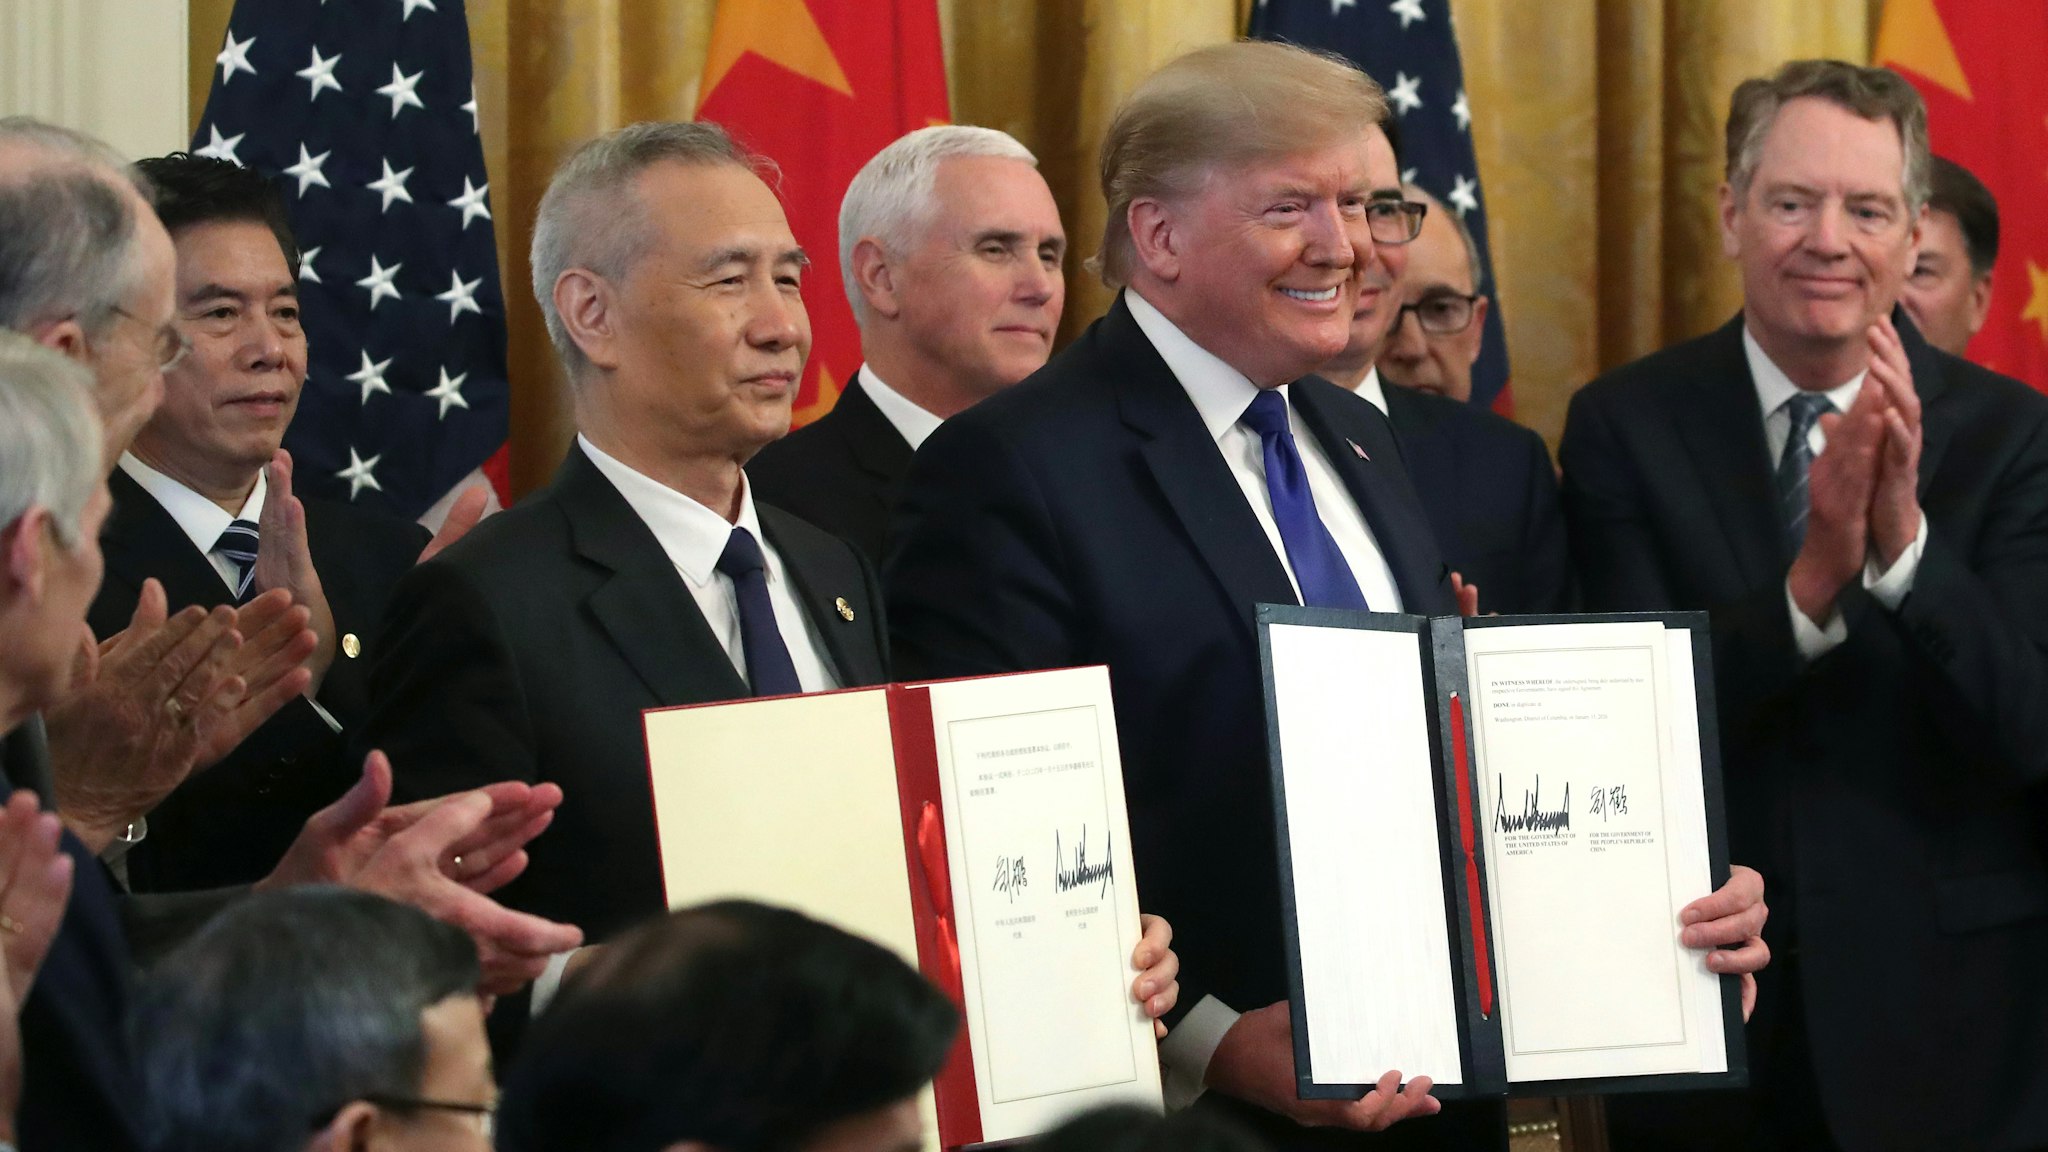 WASHINGTON, DC - JANUARY 15: U.S. President Donald Trump and Chinese Vice Premier Liu He, hold up signed agreements of phase 1 of a trade deal between the U.S. and China, in the East Room at the White House, on January 15, 2020 in Washington, DC. Phase 1 is expected to cut tariffs and promote Chinese purchases of U.S. farm, and manufactured goods while addressing disputes over intellectual property.